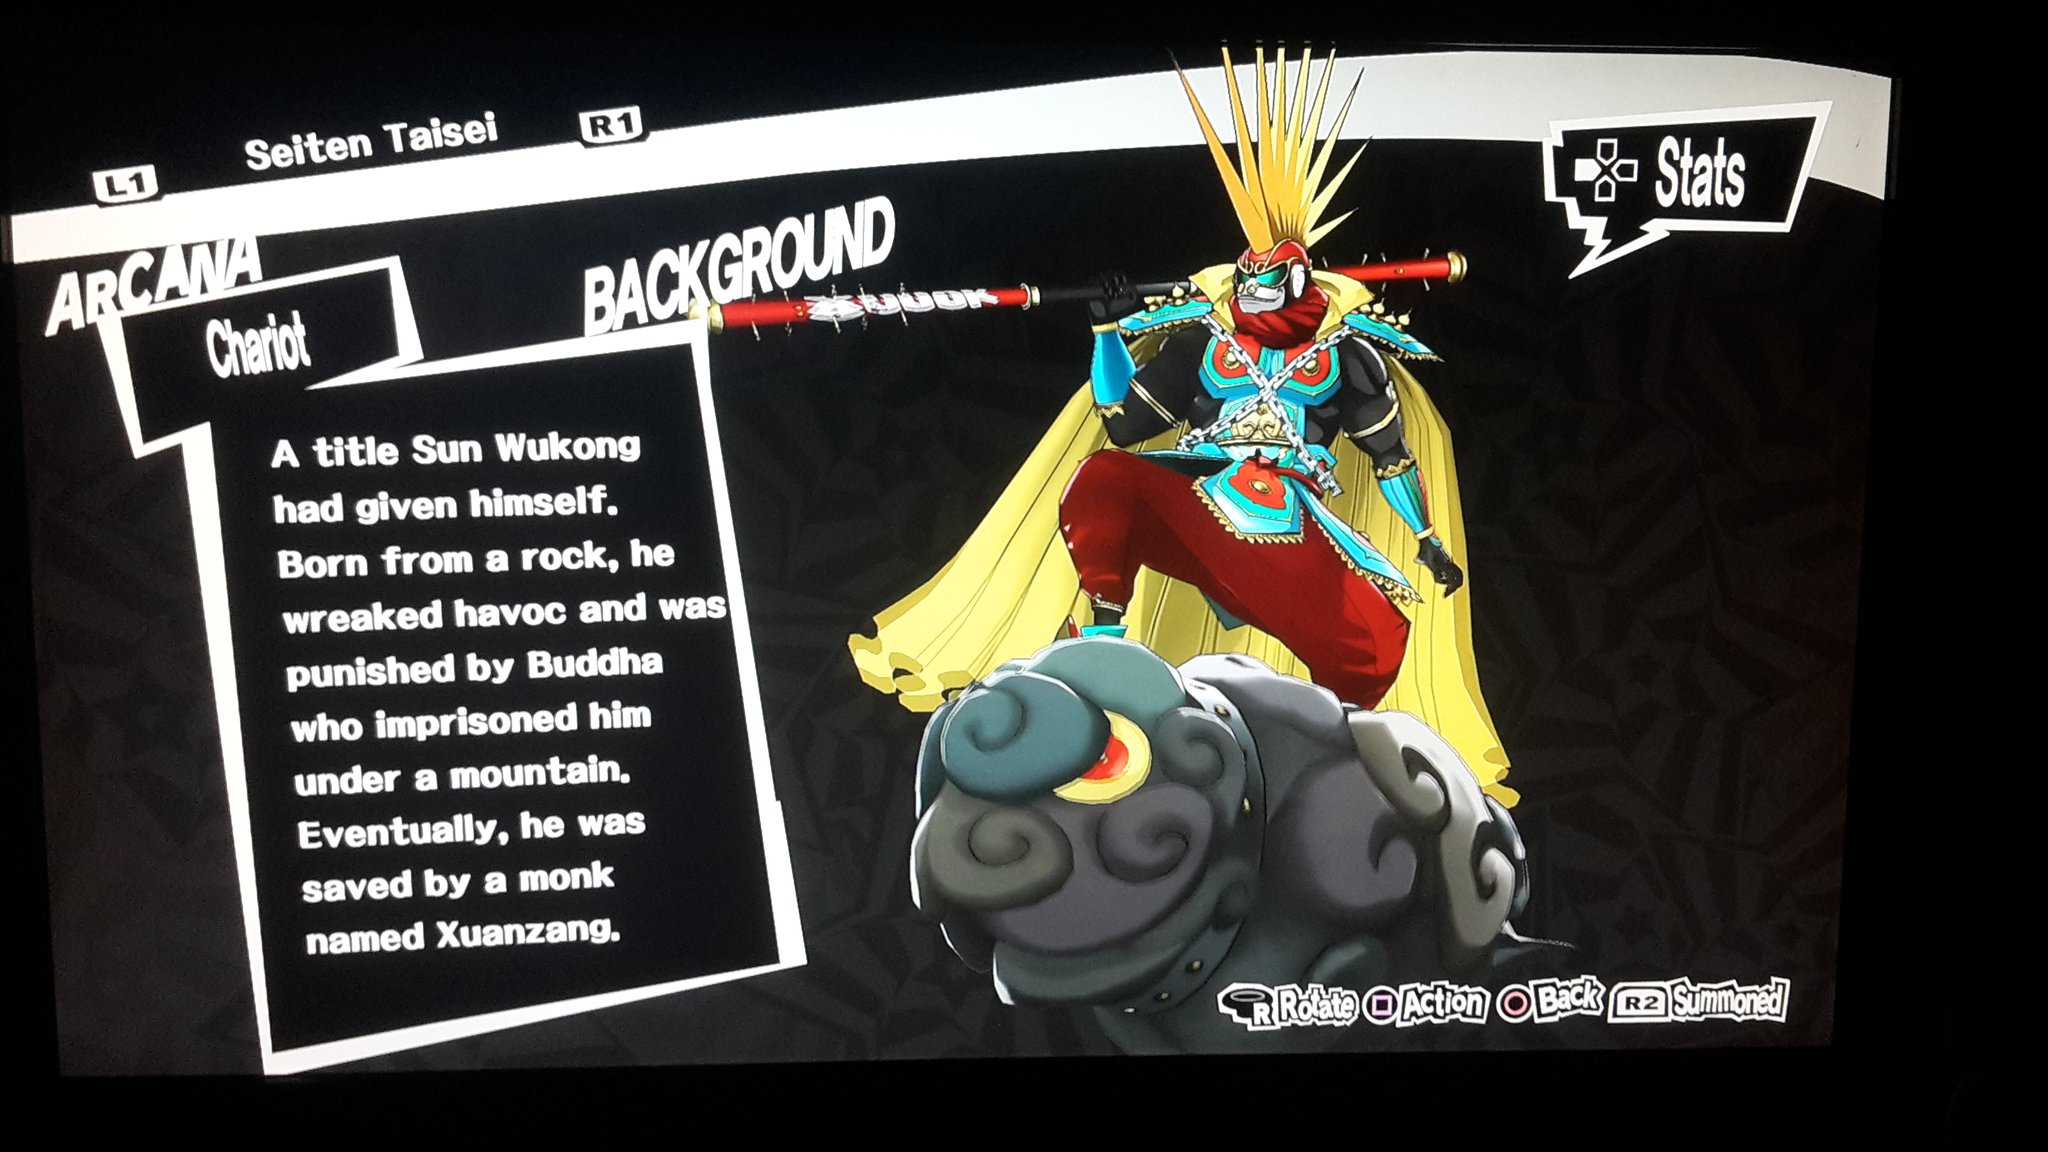 Cross (COMMS OPEN) - Completely unrelated. But if you didn't have a reason to play Persona 5 before, here it is! Sun Wukong is a Persona